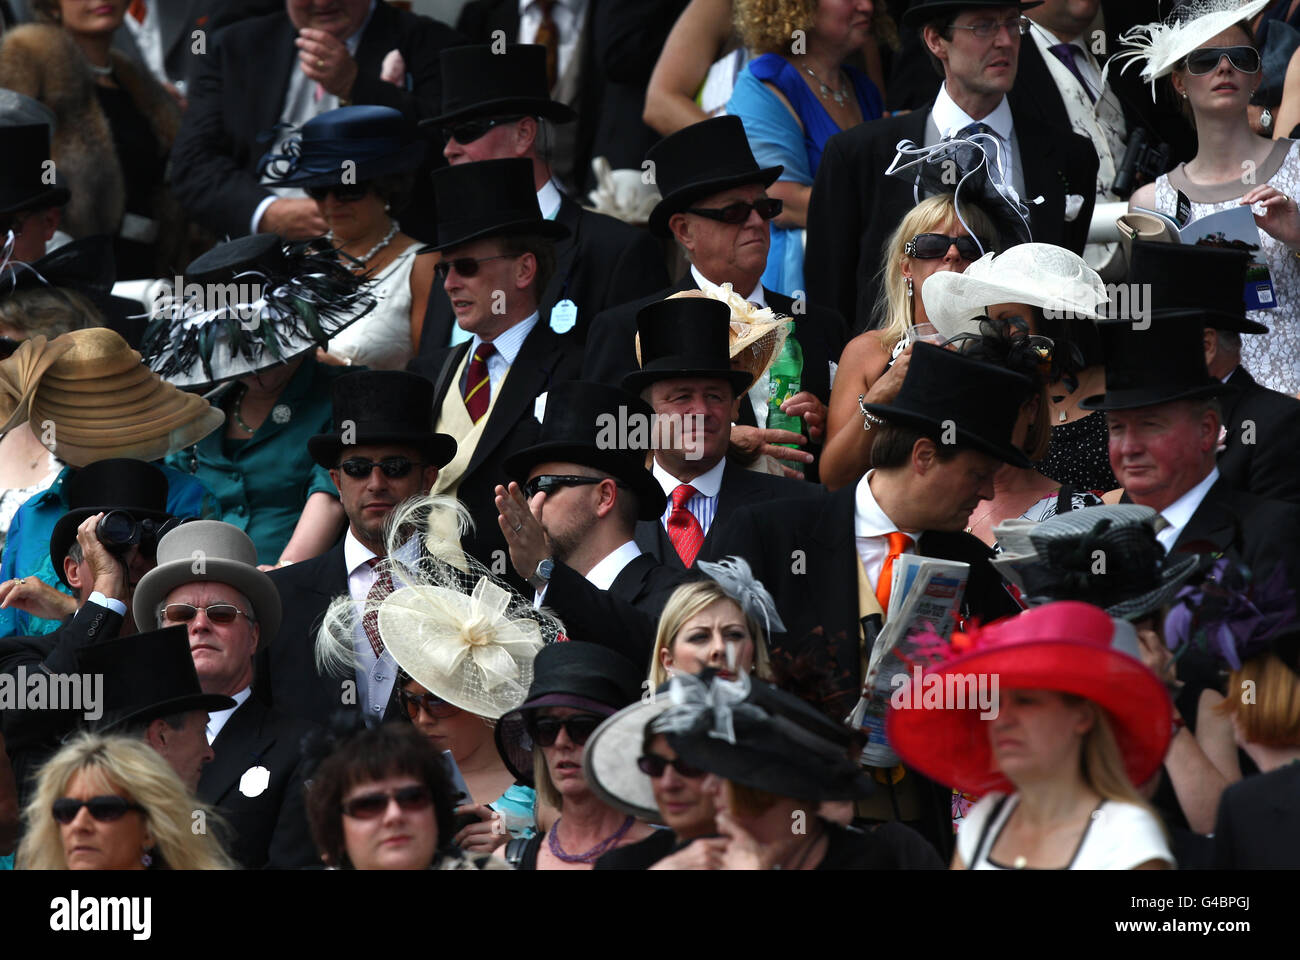 Horse Racing - Investec Derby Festival - Investec Derby Day - Epsom Downs Racecourse. Smartly dressed racegoers watch the action from the stands Stock Photo